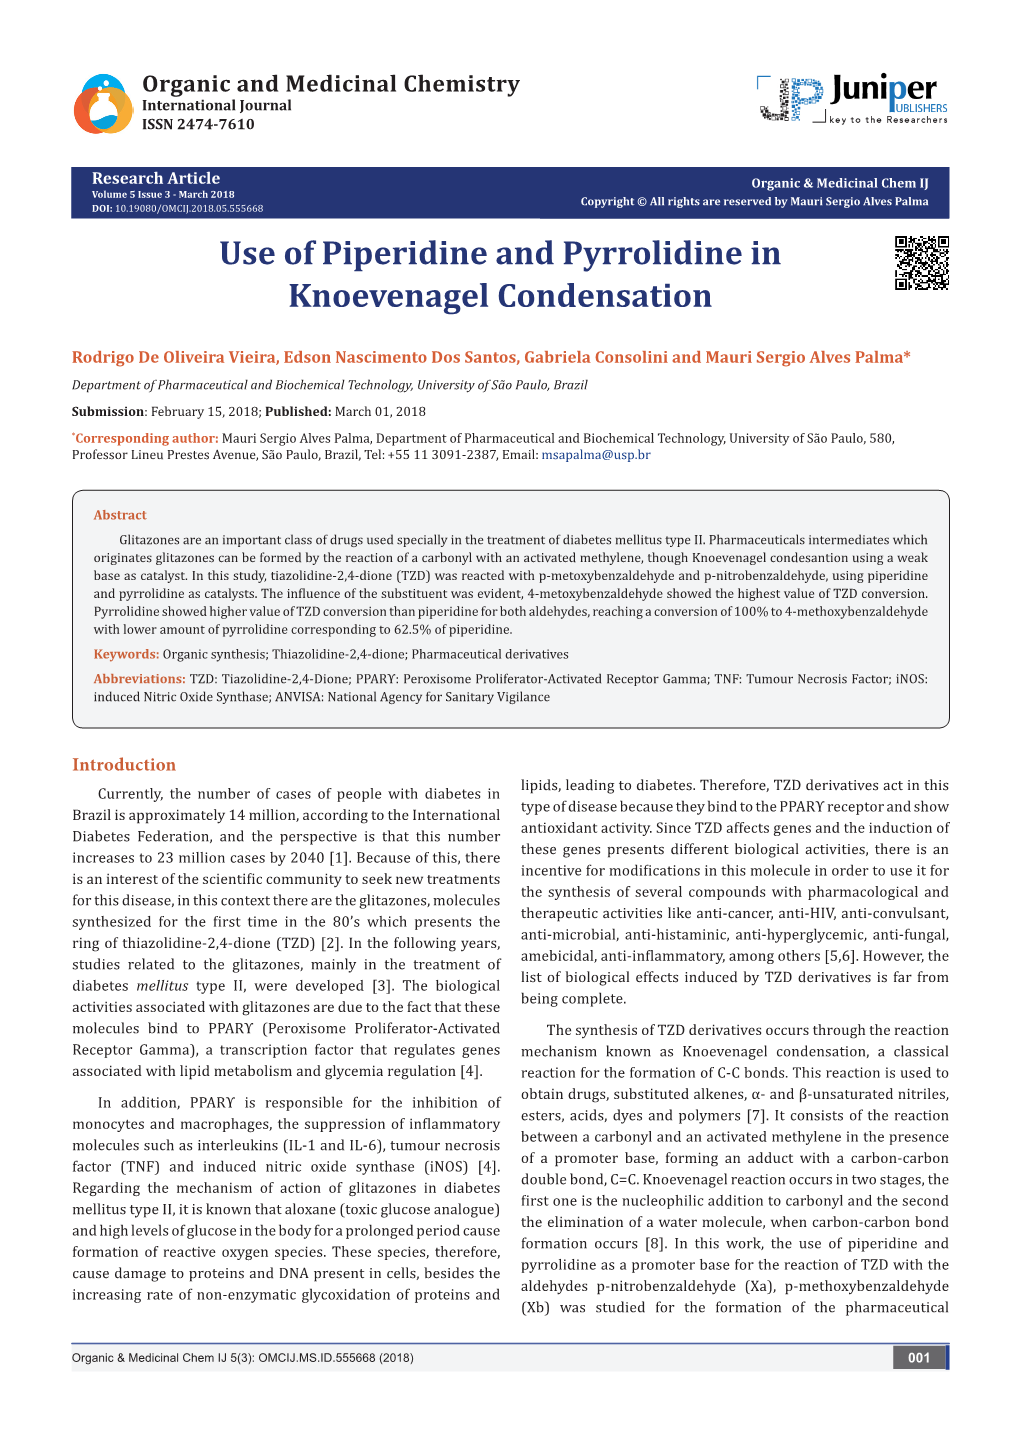 Use of Piperidine and Pyrrolidine in Knoevenagel Condensation